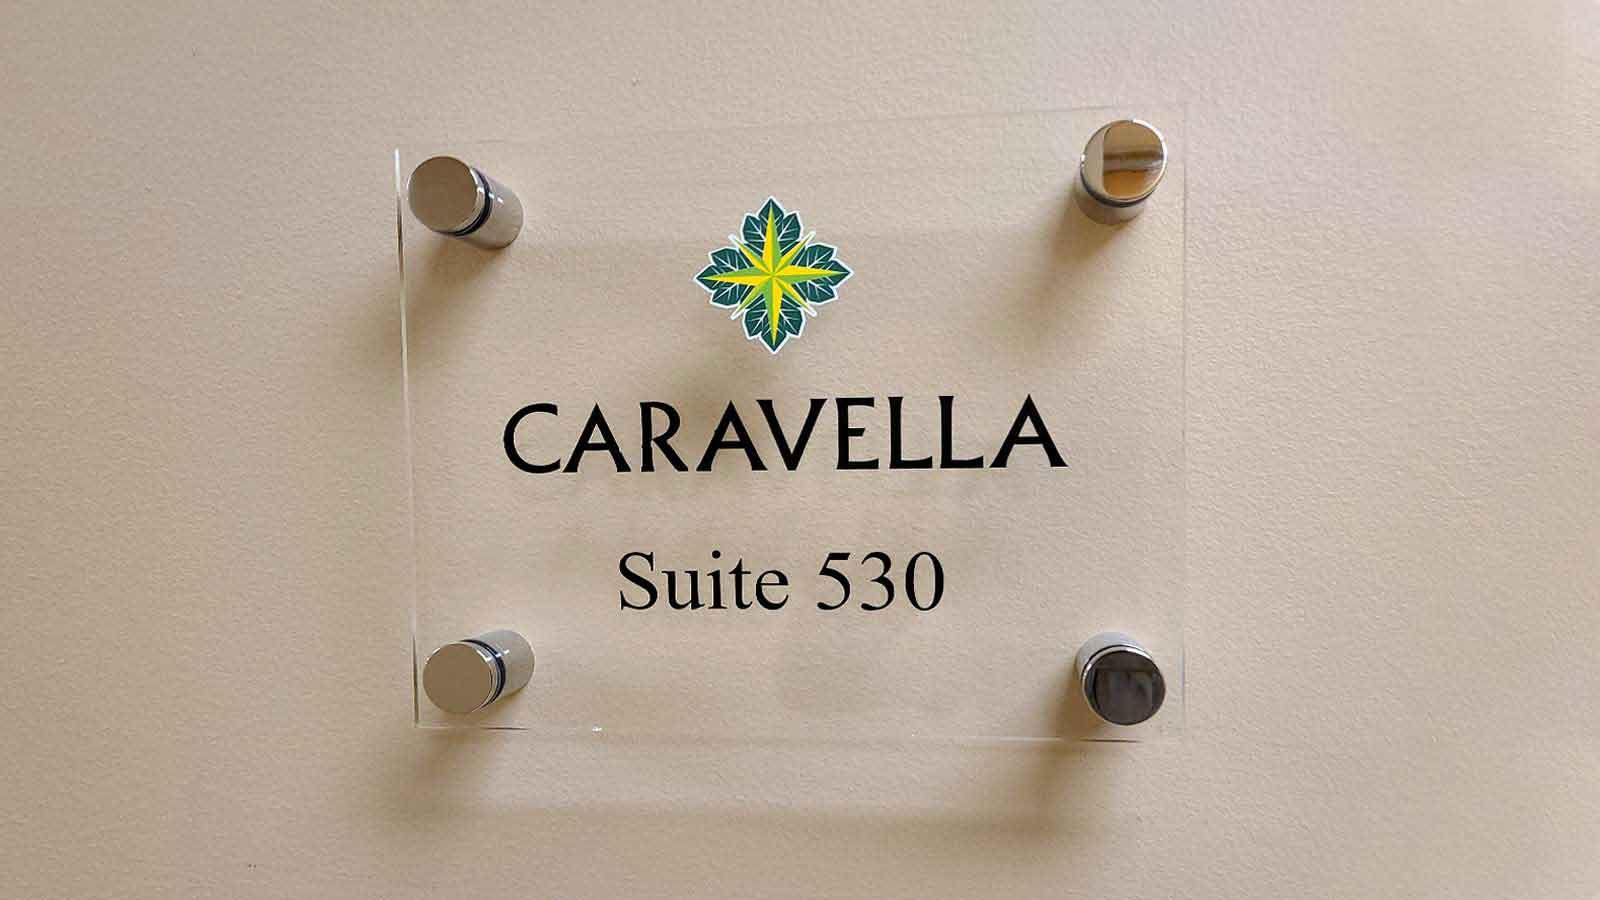 Caravella acrylic sign mounted on the wall